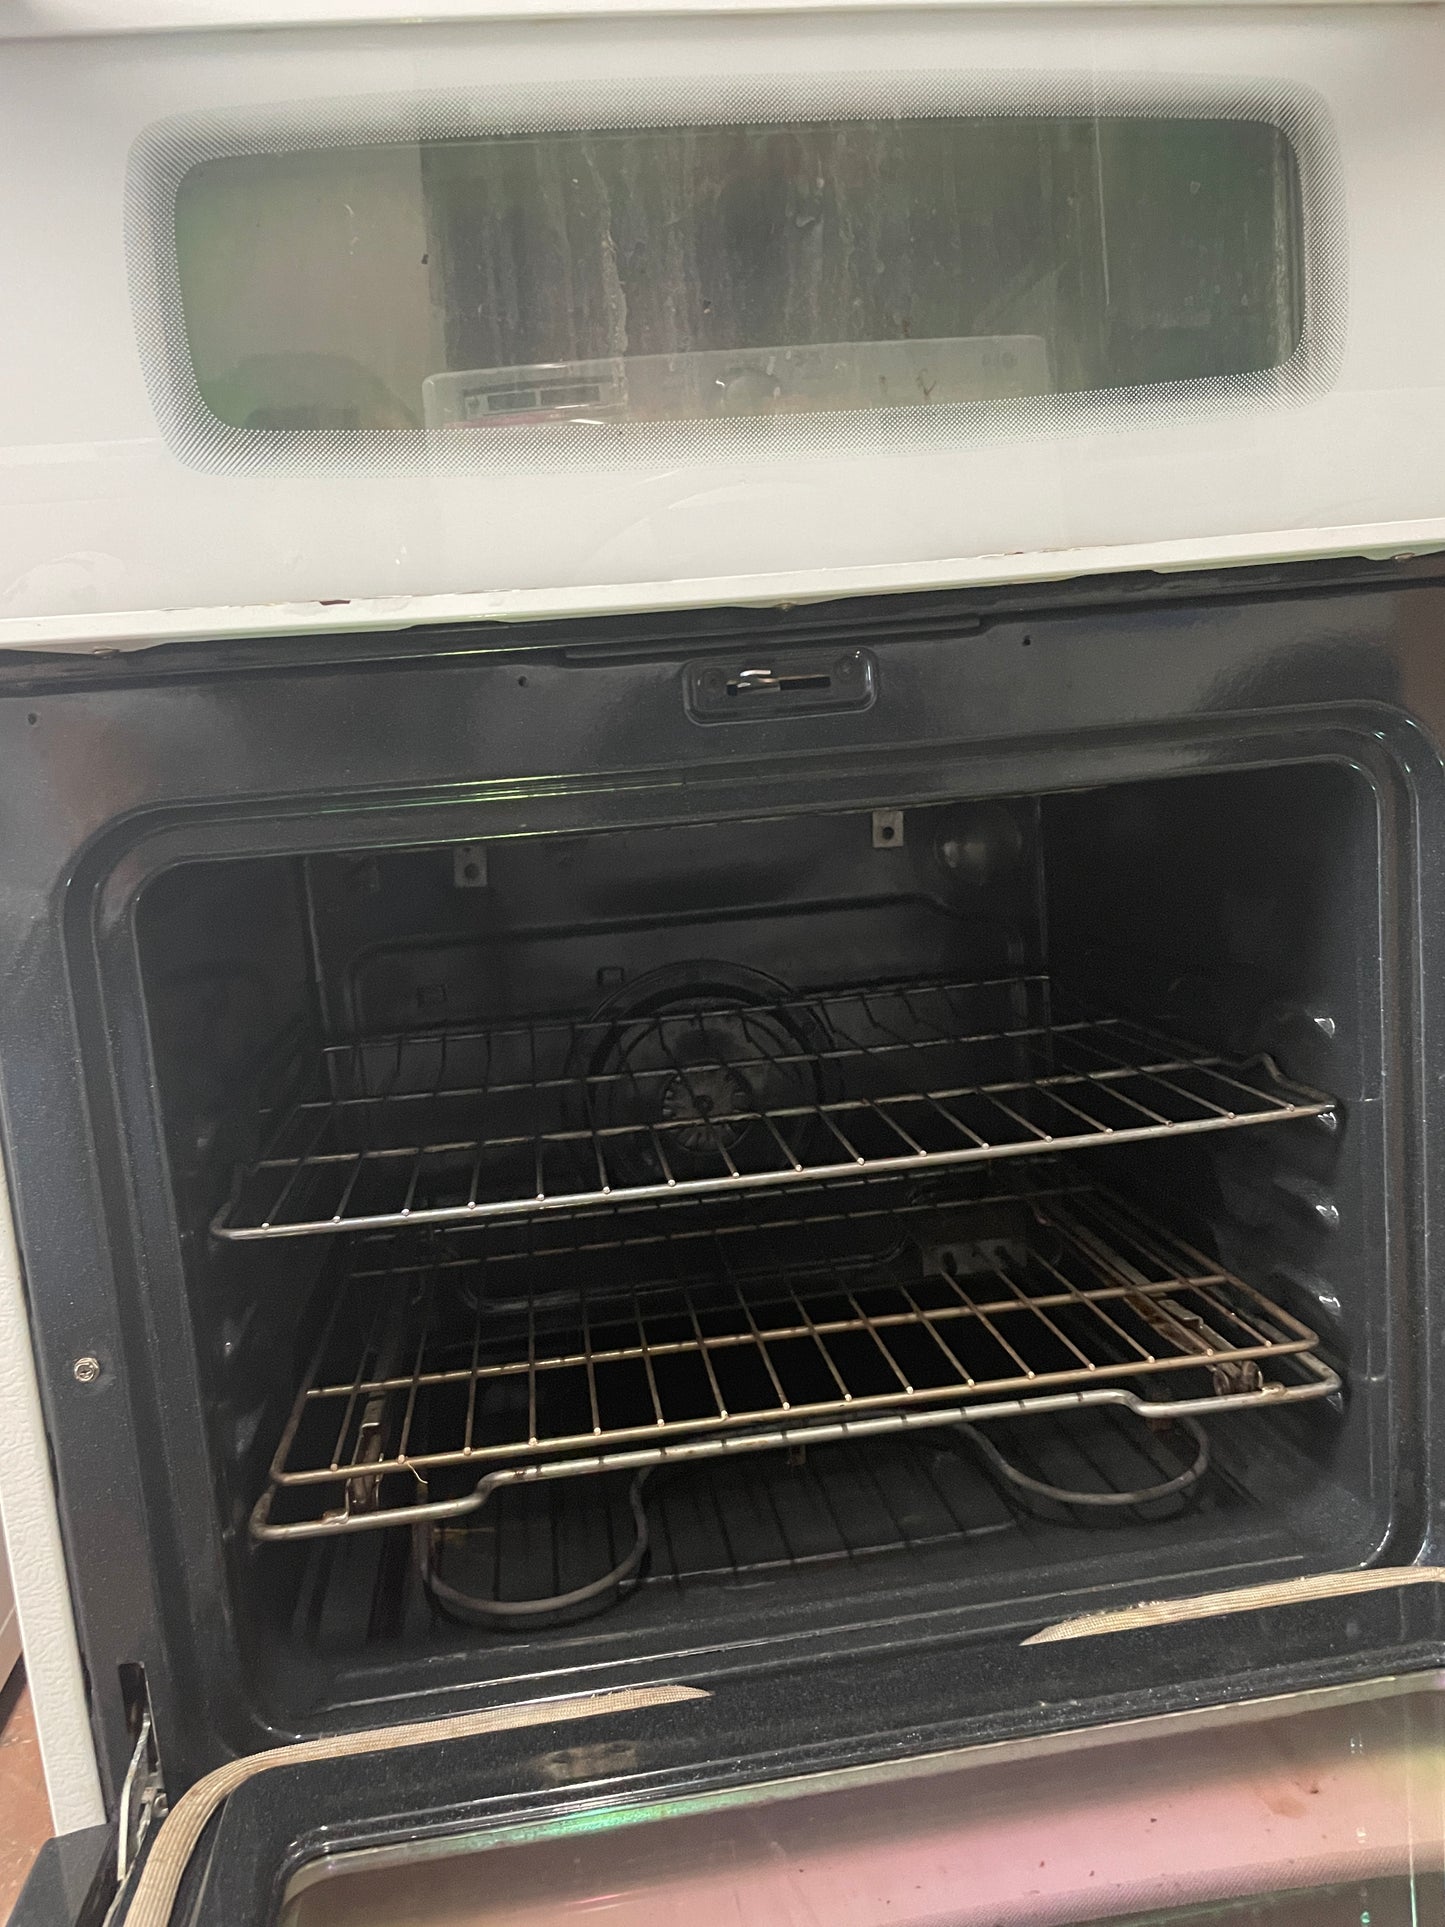 Maytag 30 Glasstop Electric Range In White 999751